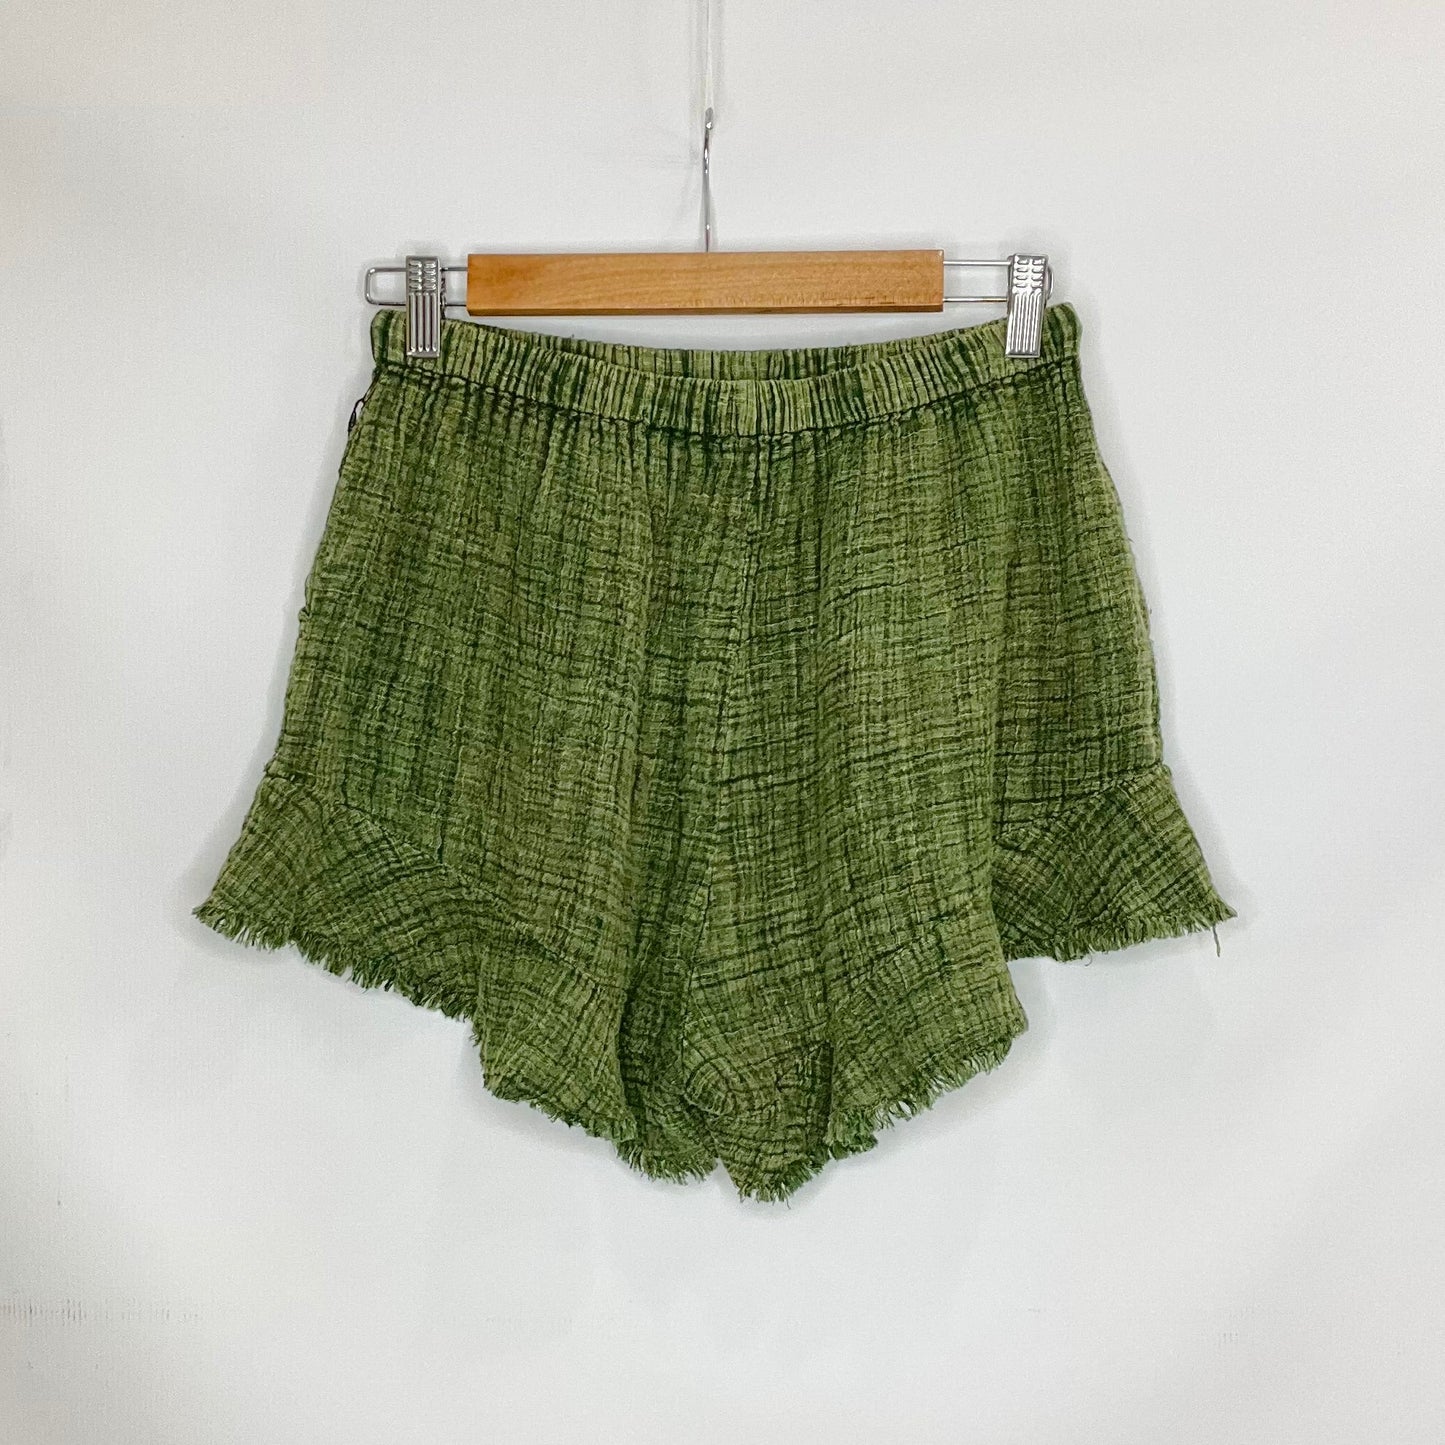 Green Shorts Free People, Size M